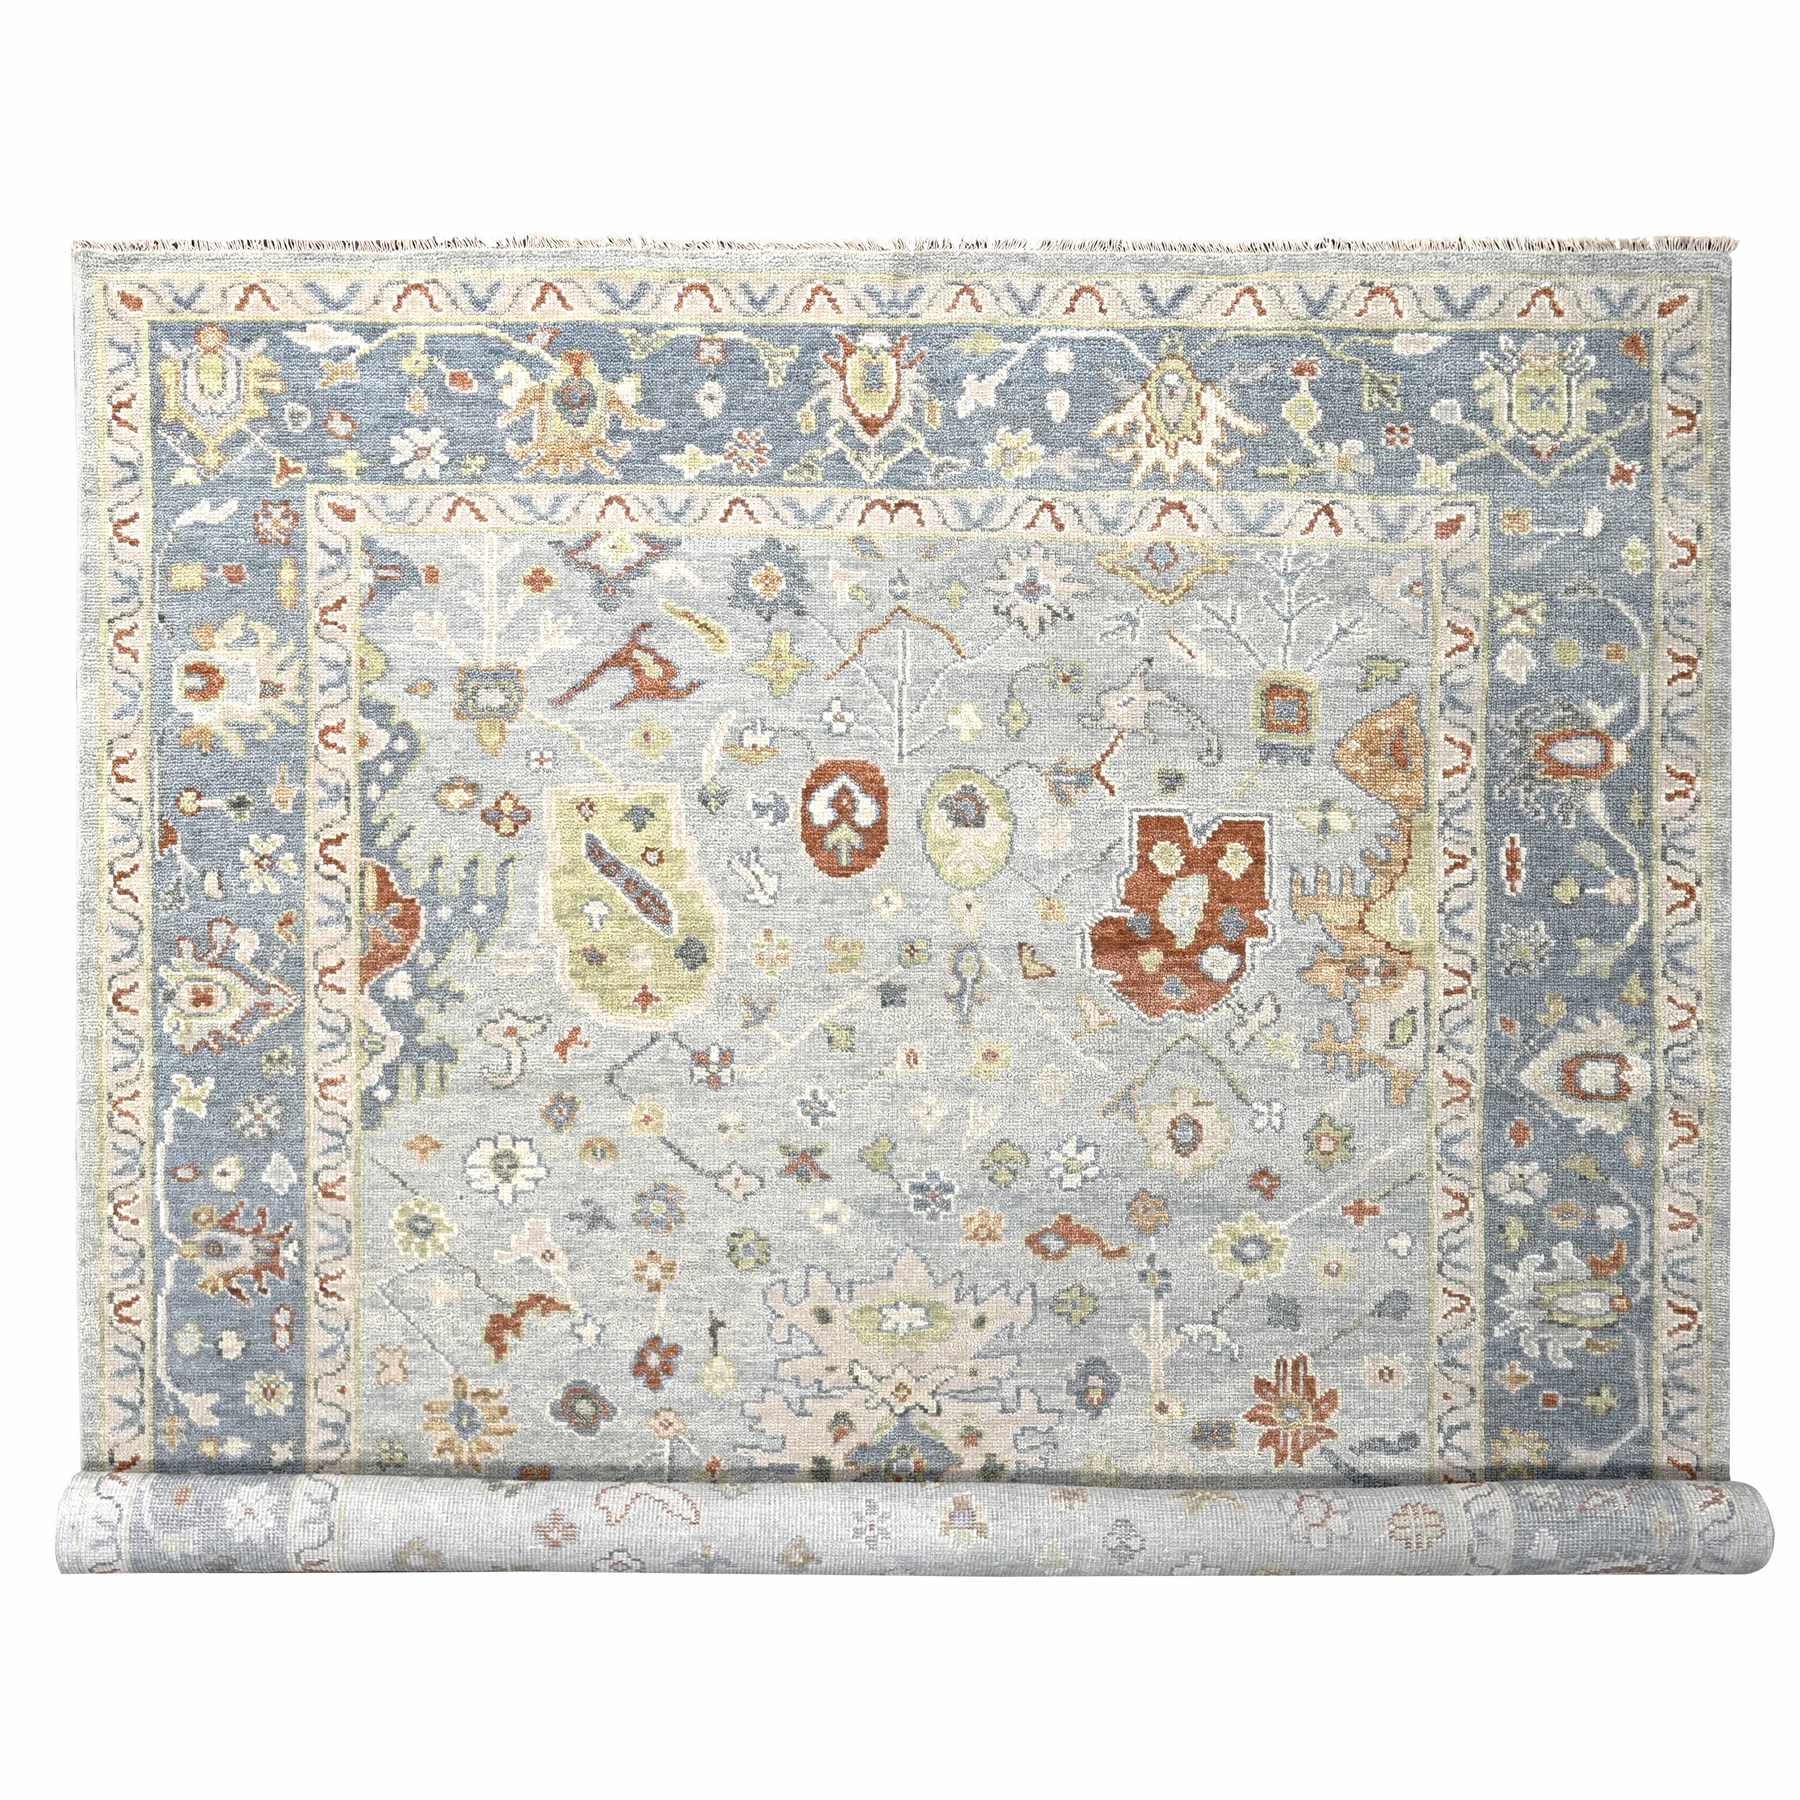 Moonmist and Solitude Blue, Hand Knotted Tone On Tone, Oushak Design Soft Pile, Soft and Shiny Wool, Supple Collection, Oriental Rug 